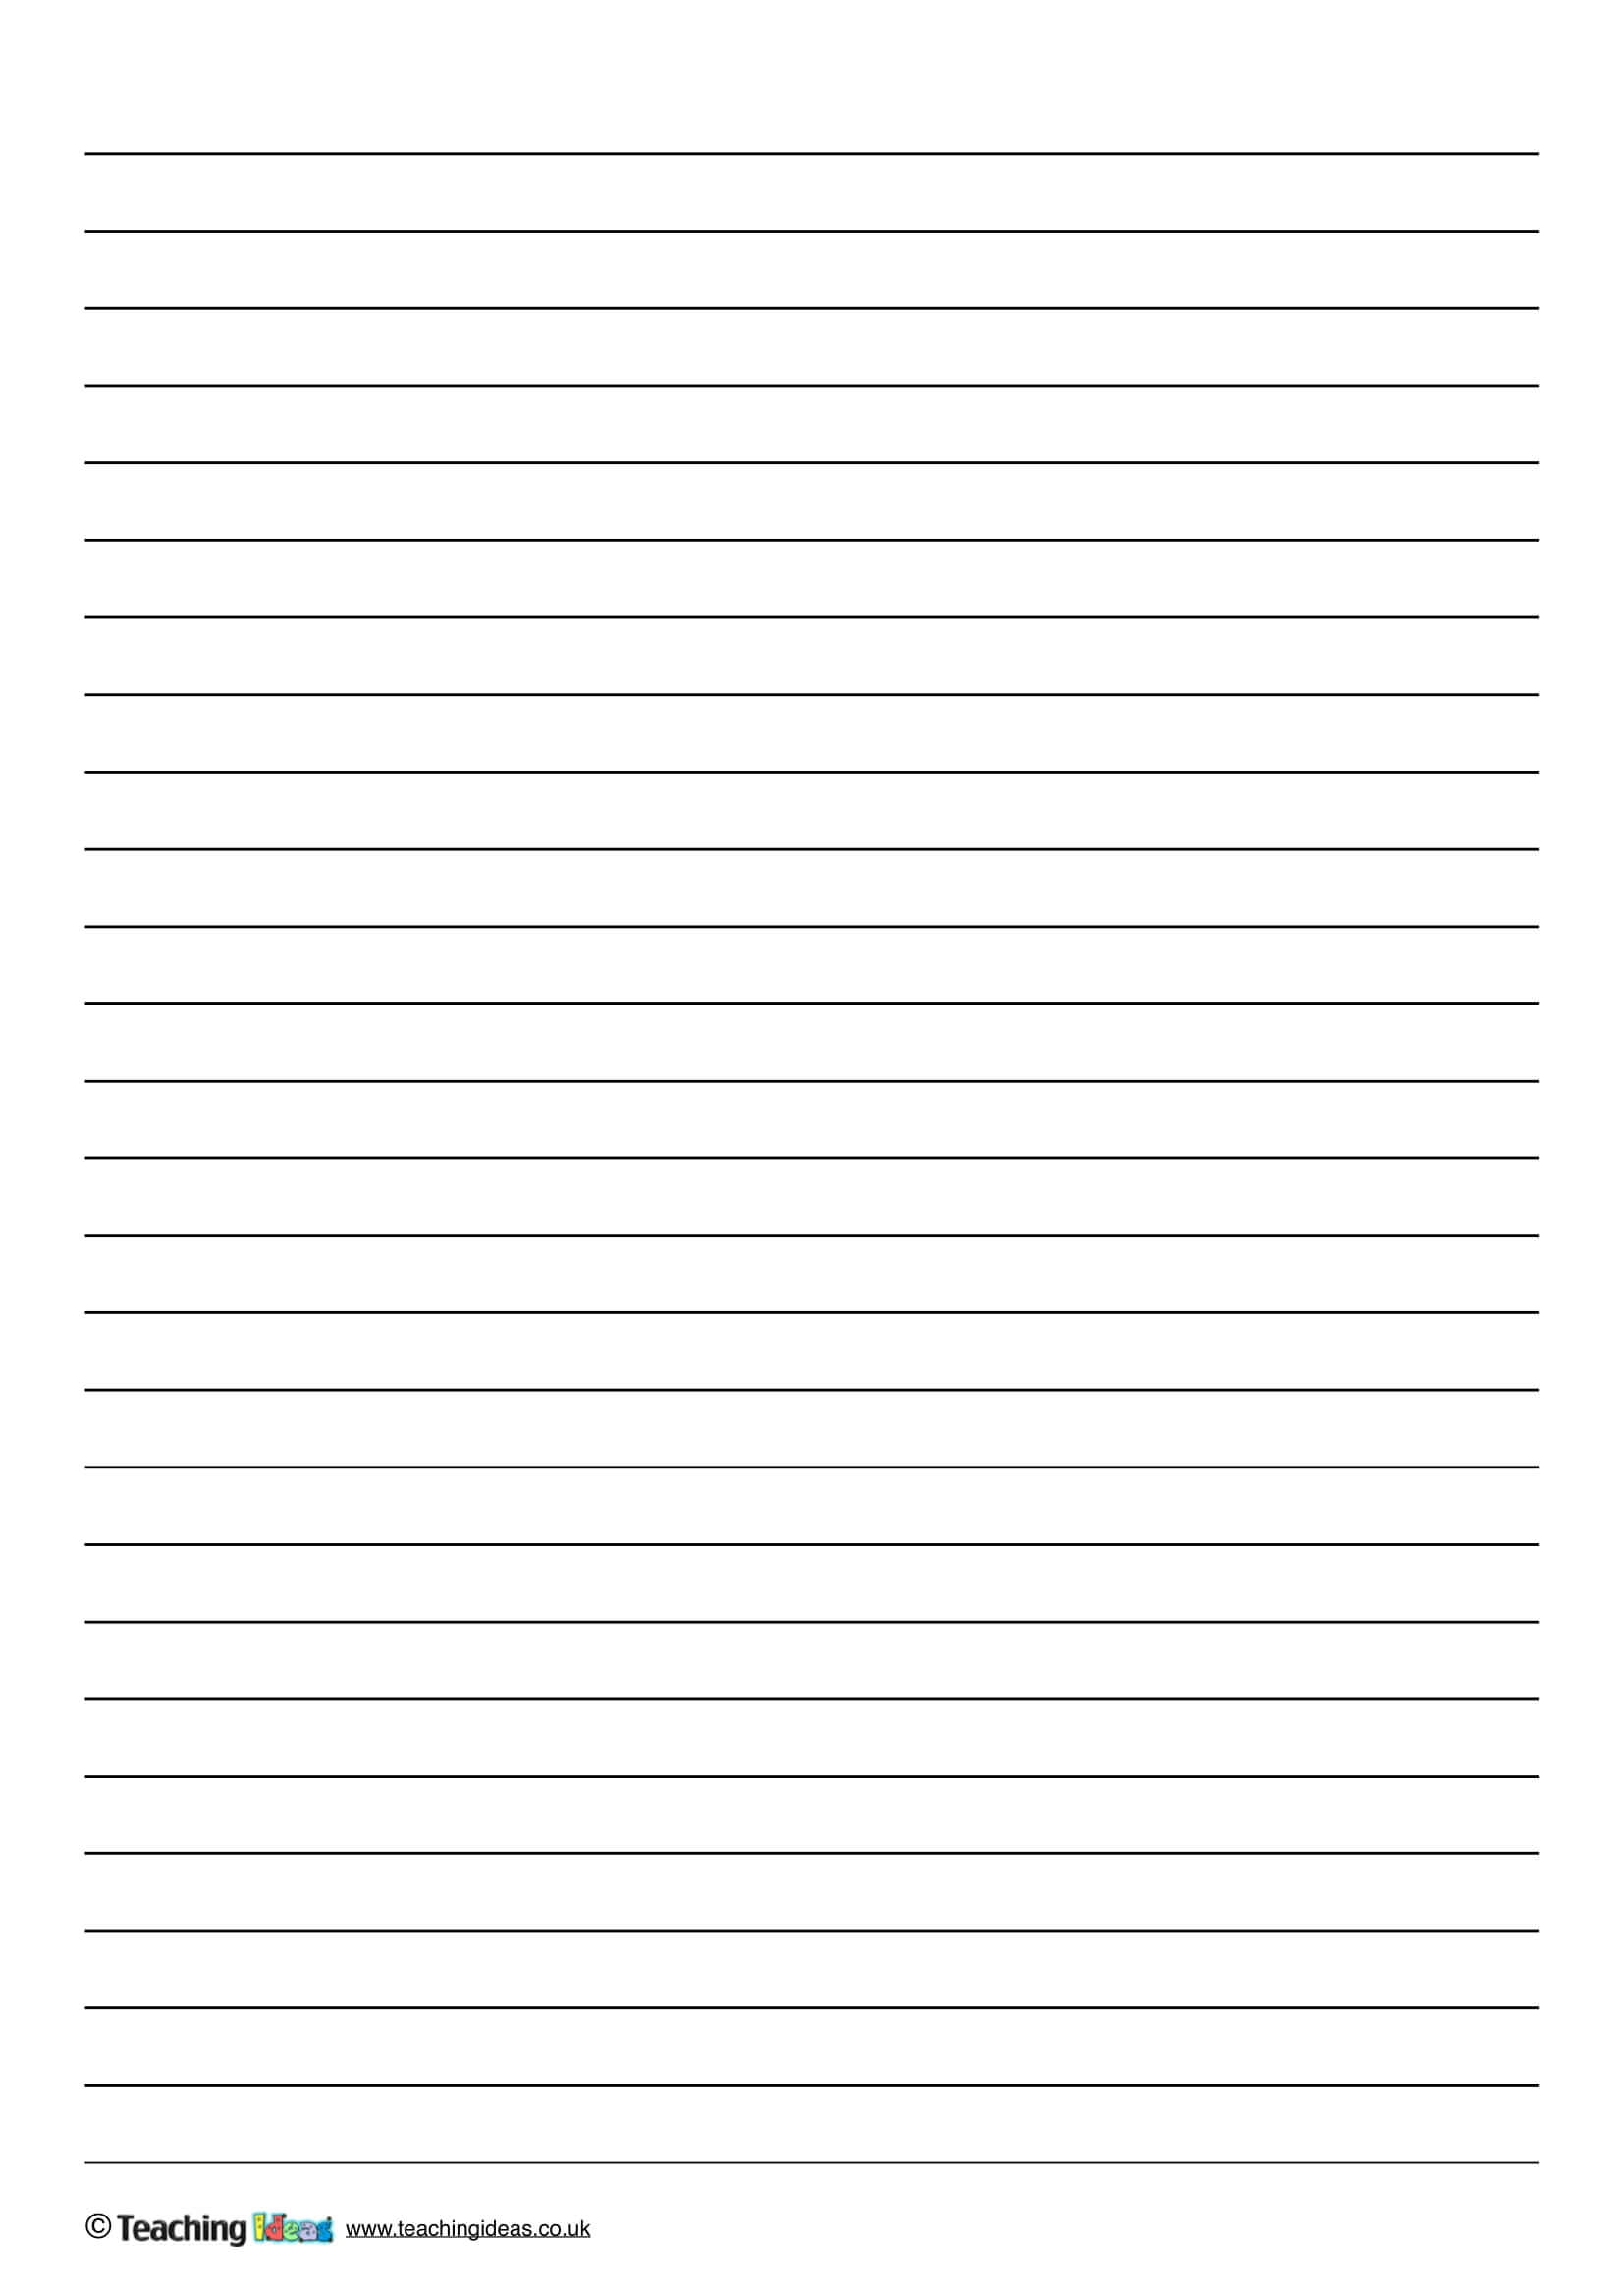 11+ Lined Paper Templates - Pdf | Free & Premium Templates With Ruled Paper Word Template